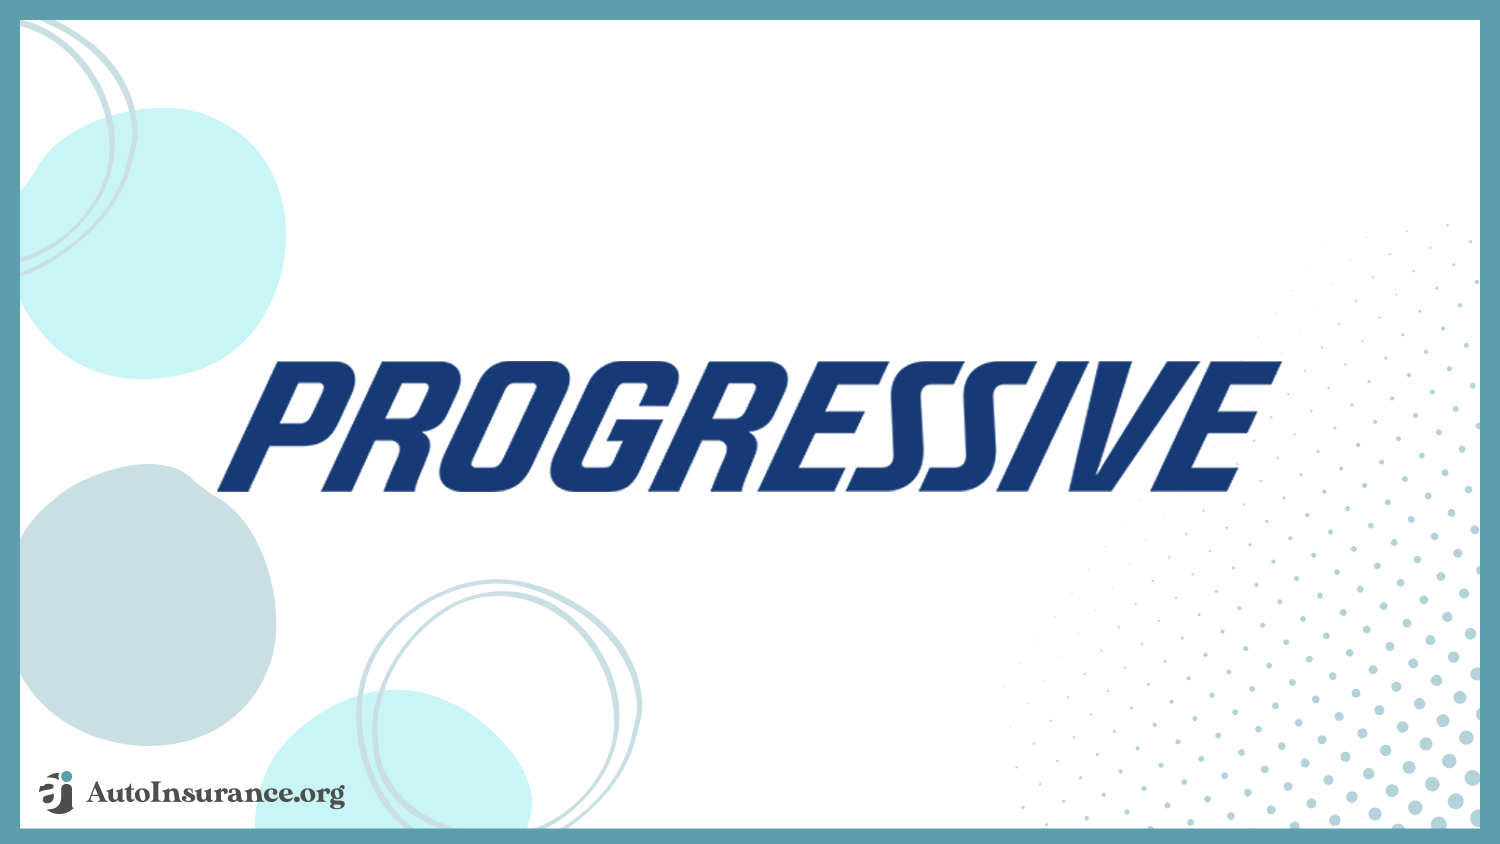 Progressive: Best Auto Insurance for Military Families and Veterans